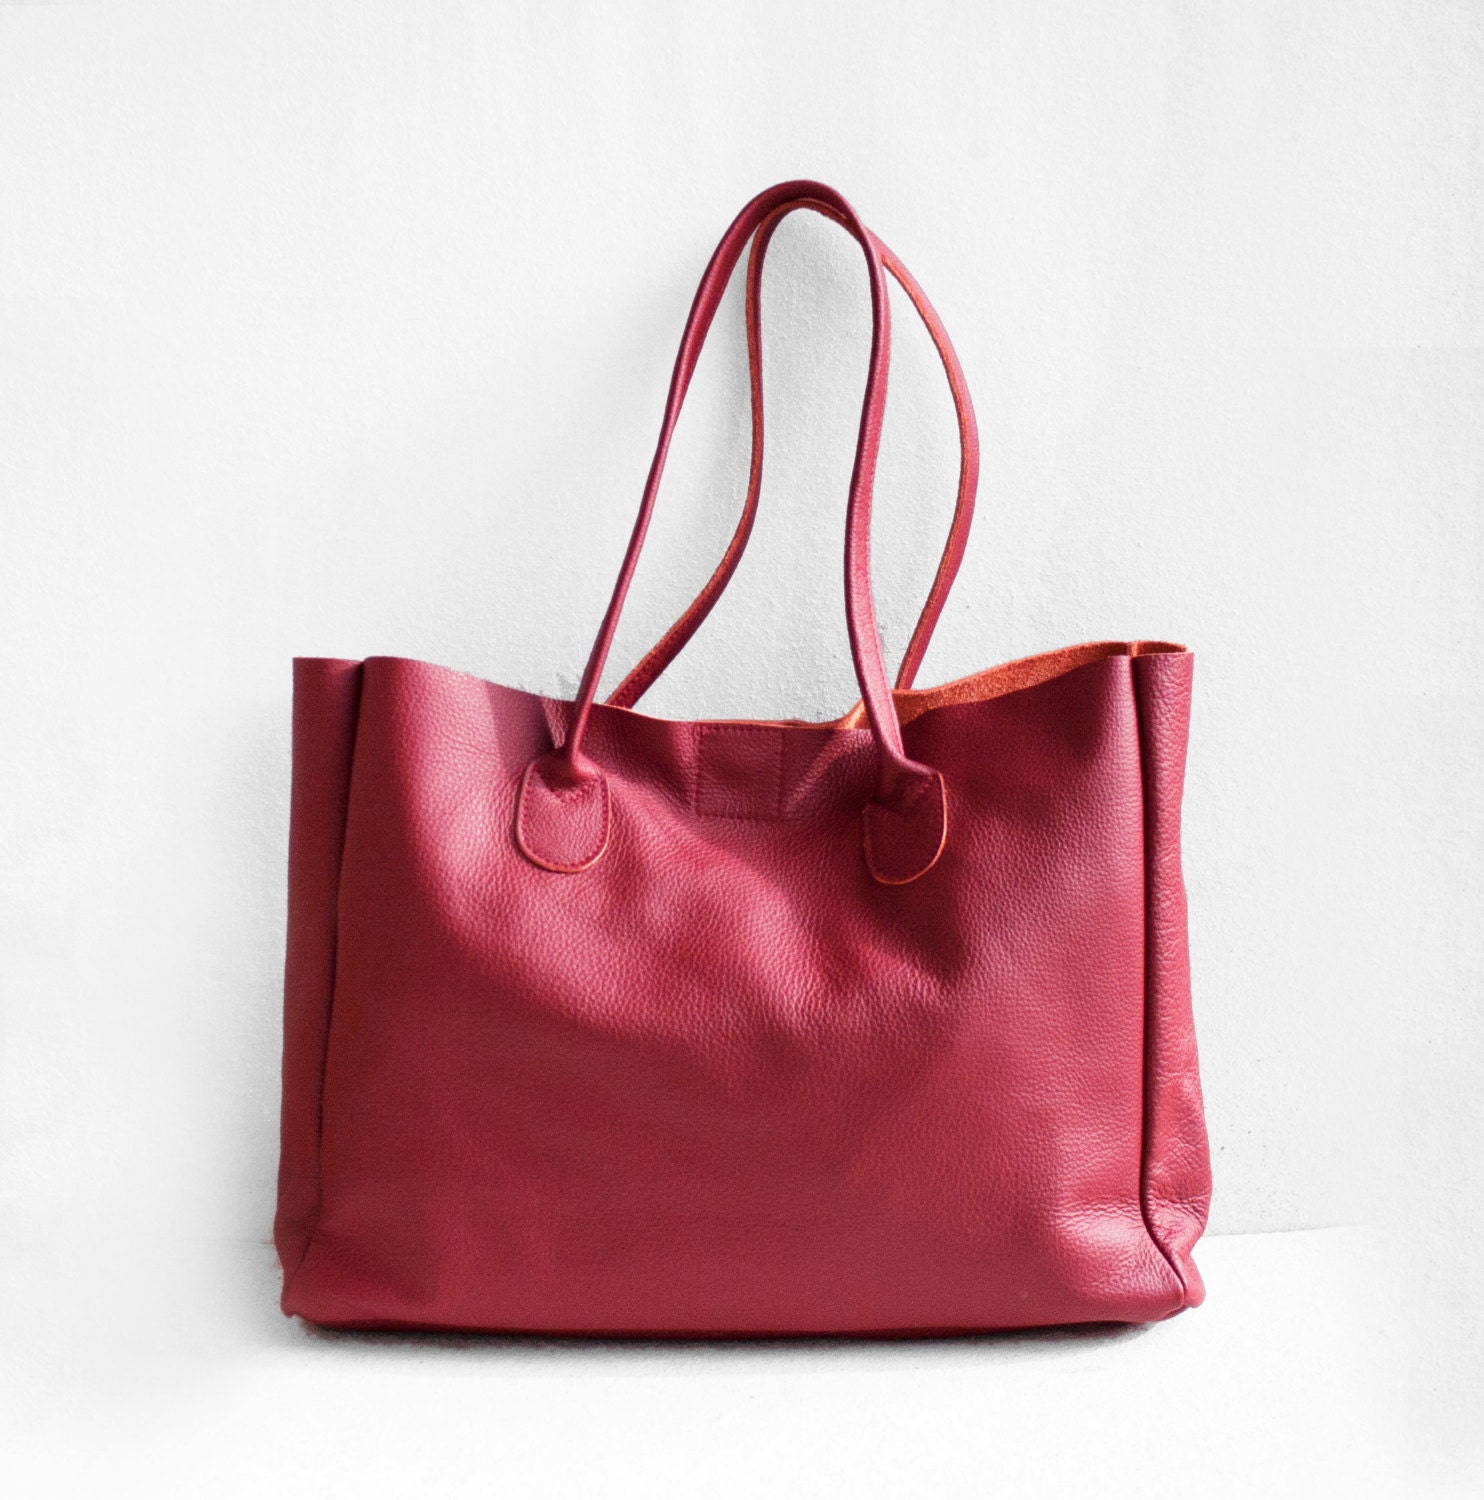 Cranberry Leather Shopper Leather Tote Bag Soft Leather Bag